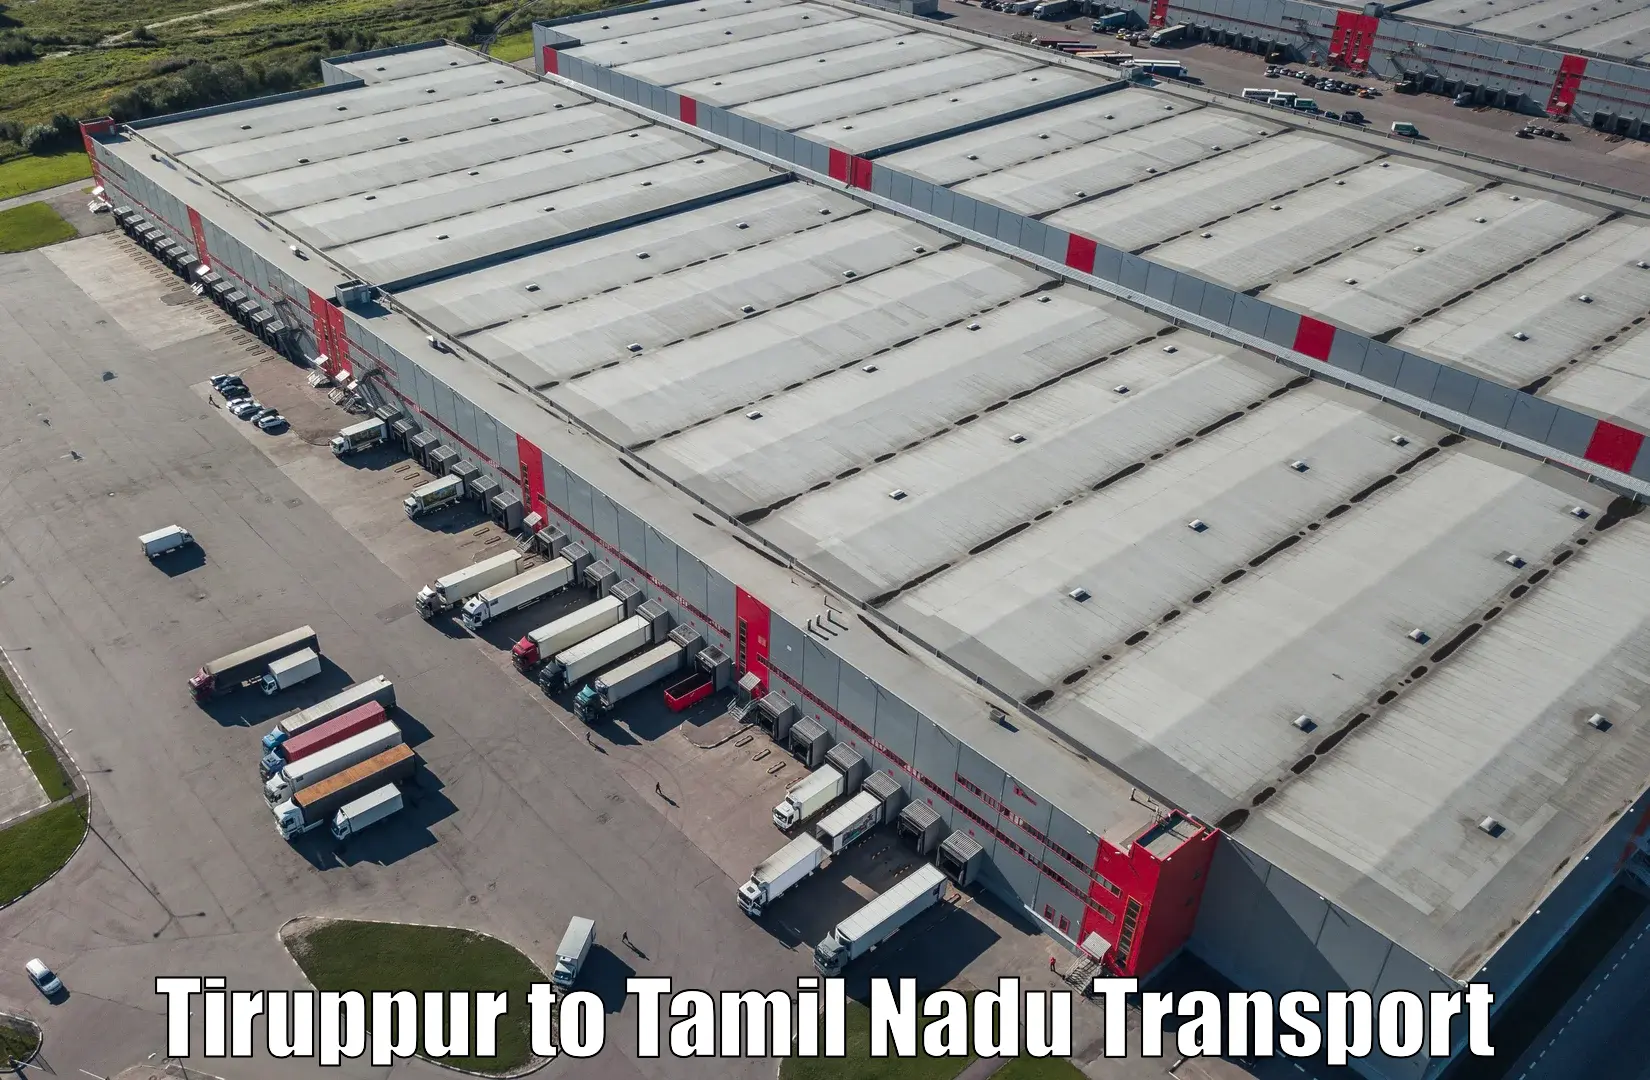 Luggage transport services Tiruppur to Ennore Port Chennai